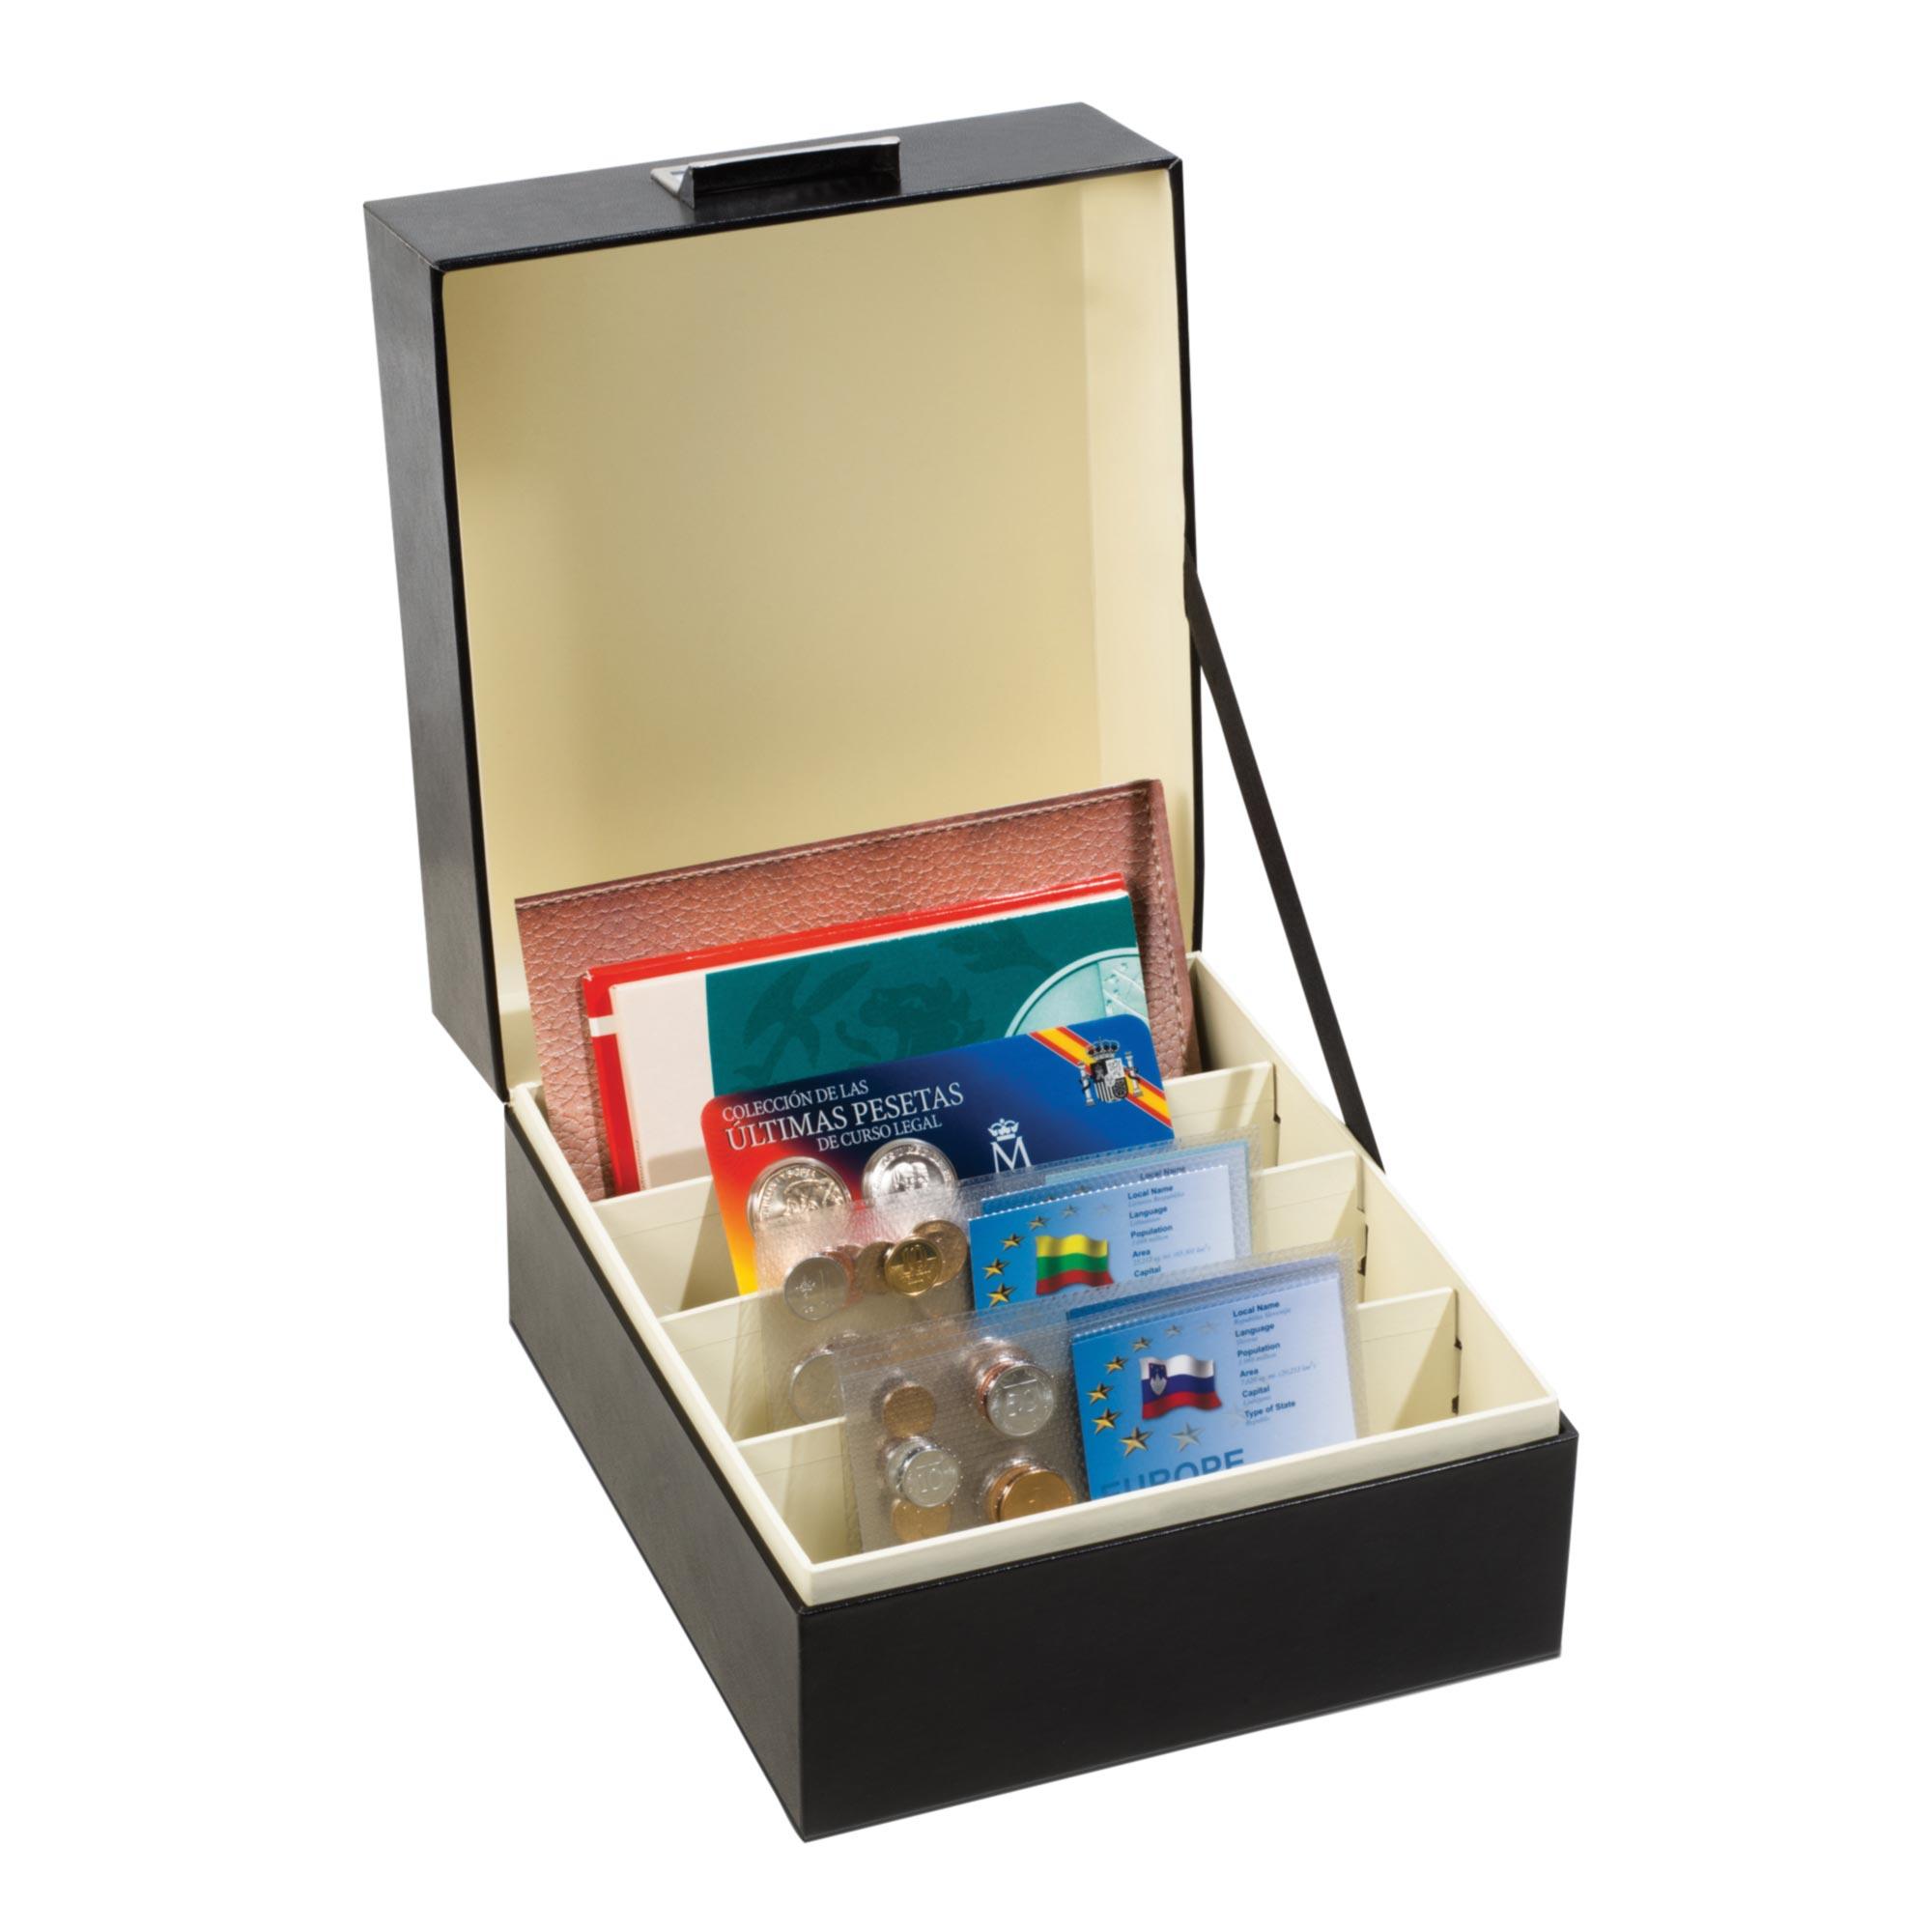 Logik A5 Archive Collectors Box for Stockcards, postcards, banknotes etc